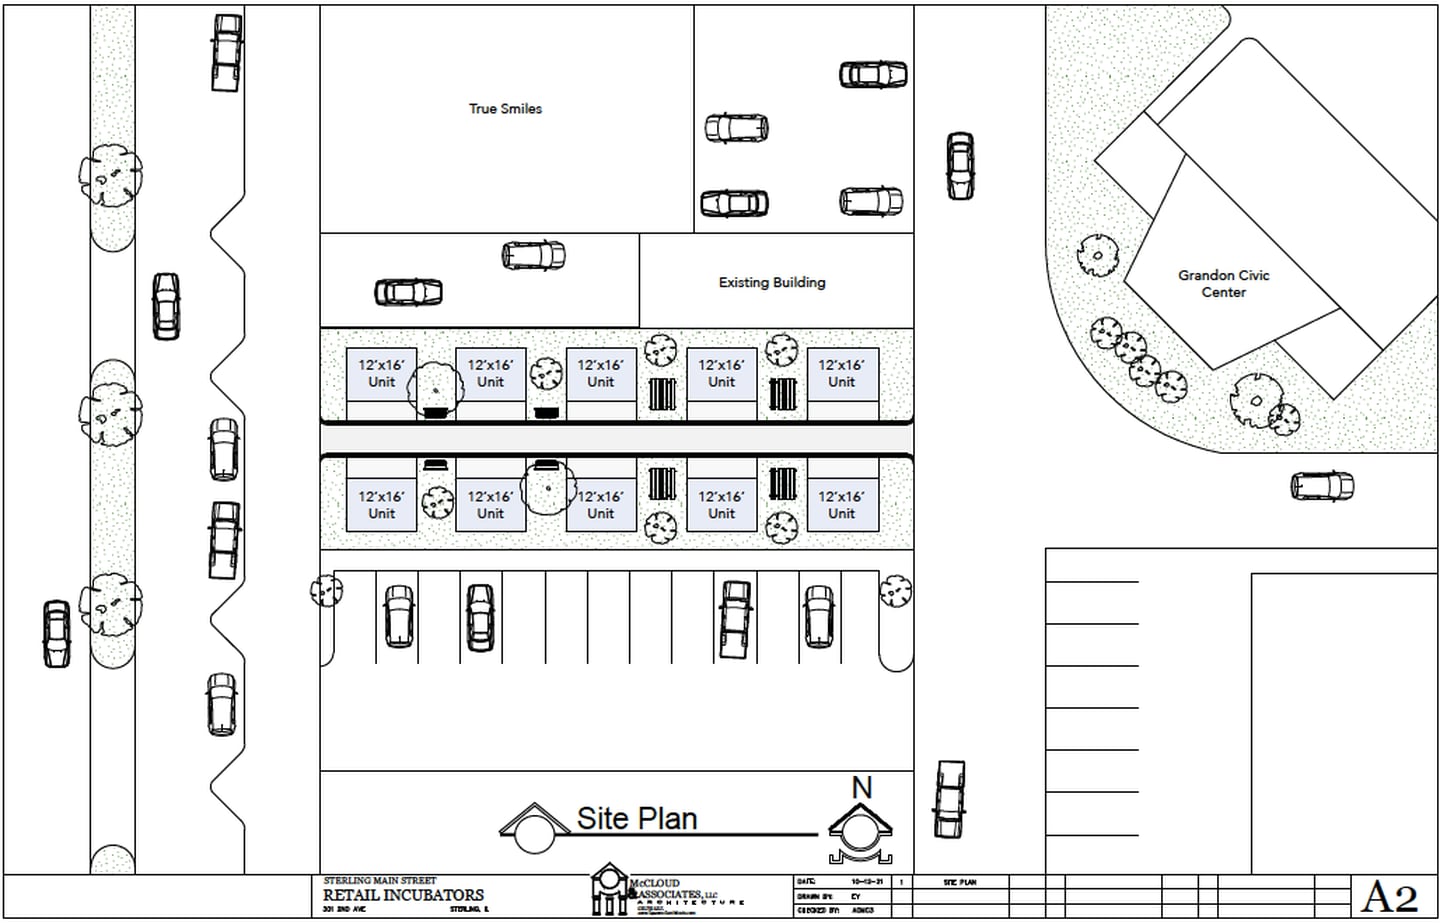 The site plan for Sterling Main Street's retail incubator, Shoppes at Grandon Plaza.